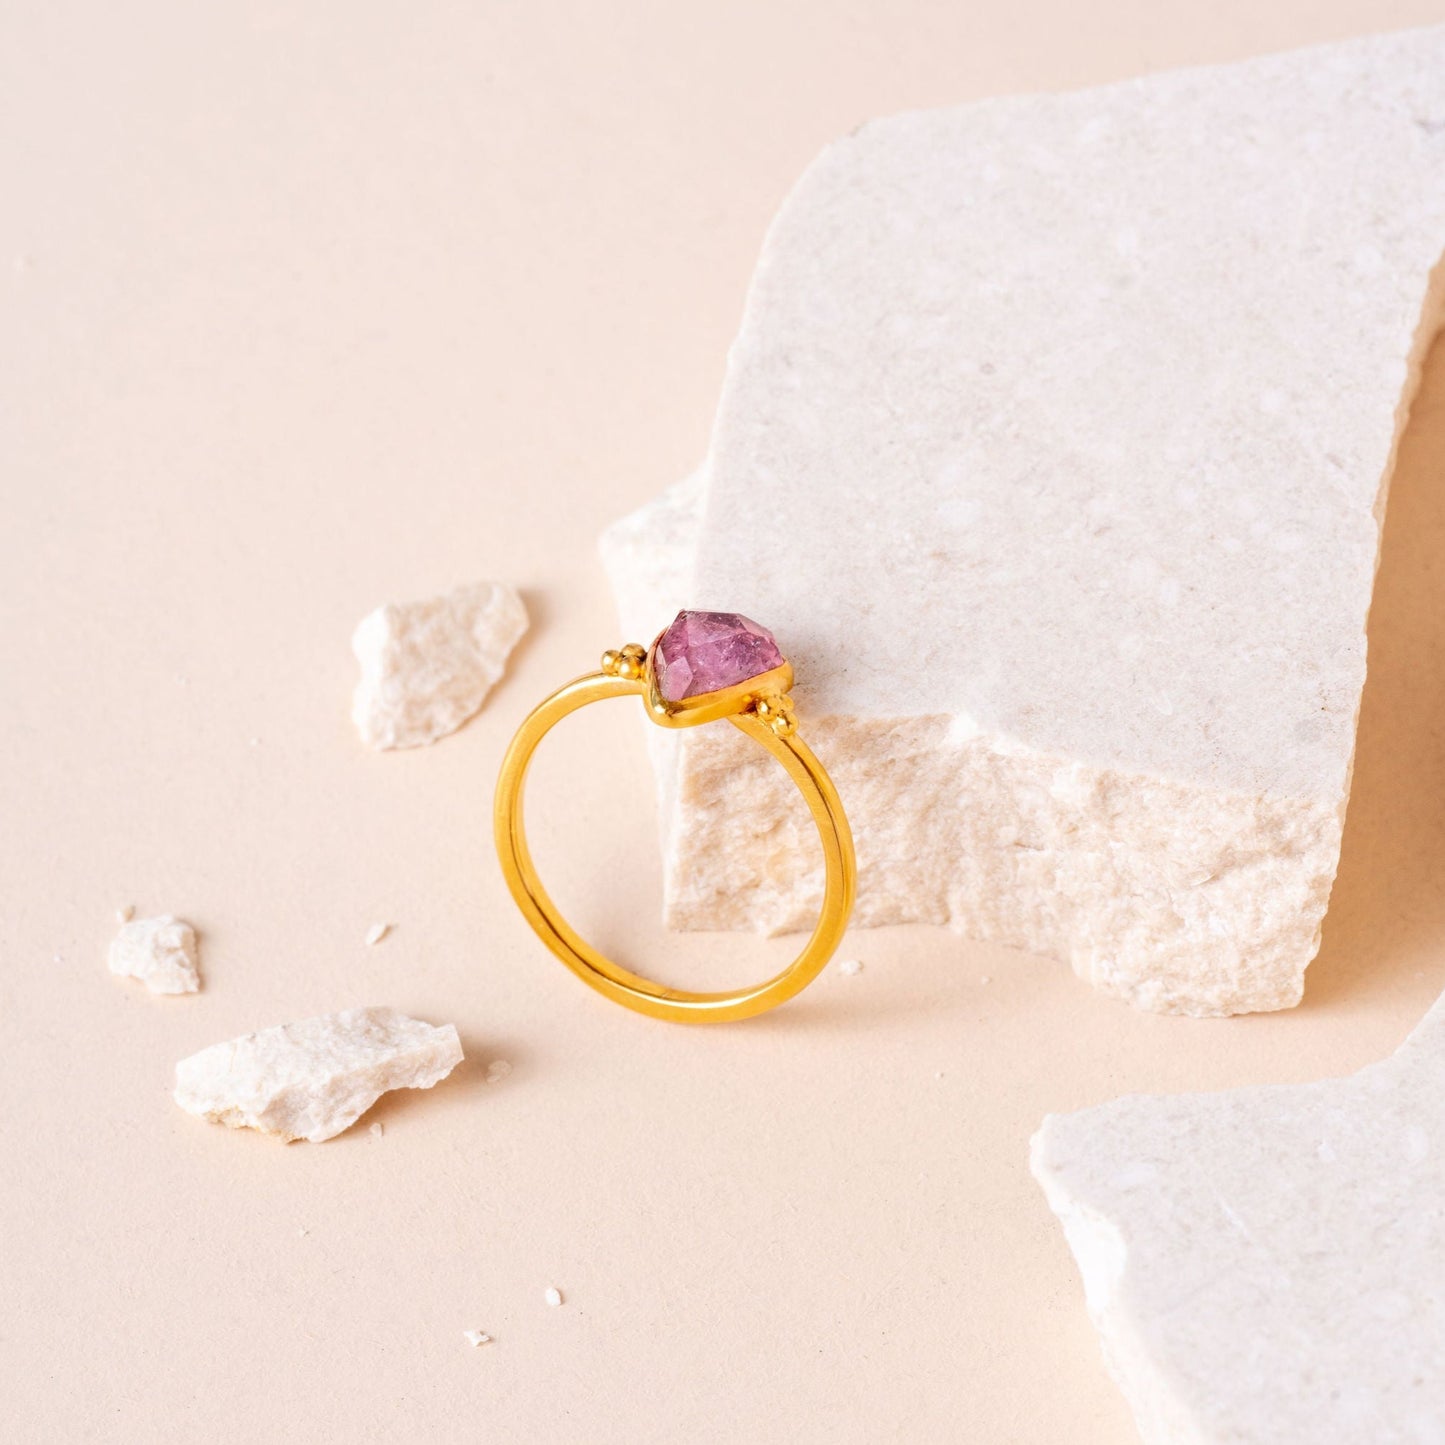 Indulge in simplicity and beauty with this gold ring, adorned with a delicate pink tourmaline gem and intricate granulation.